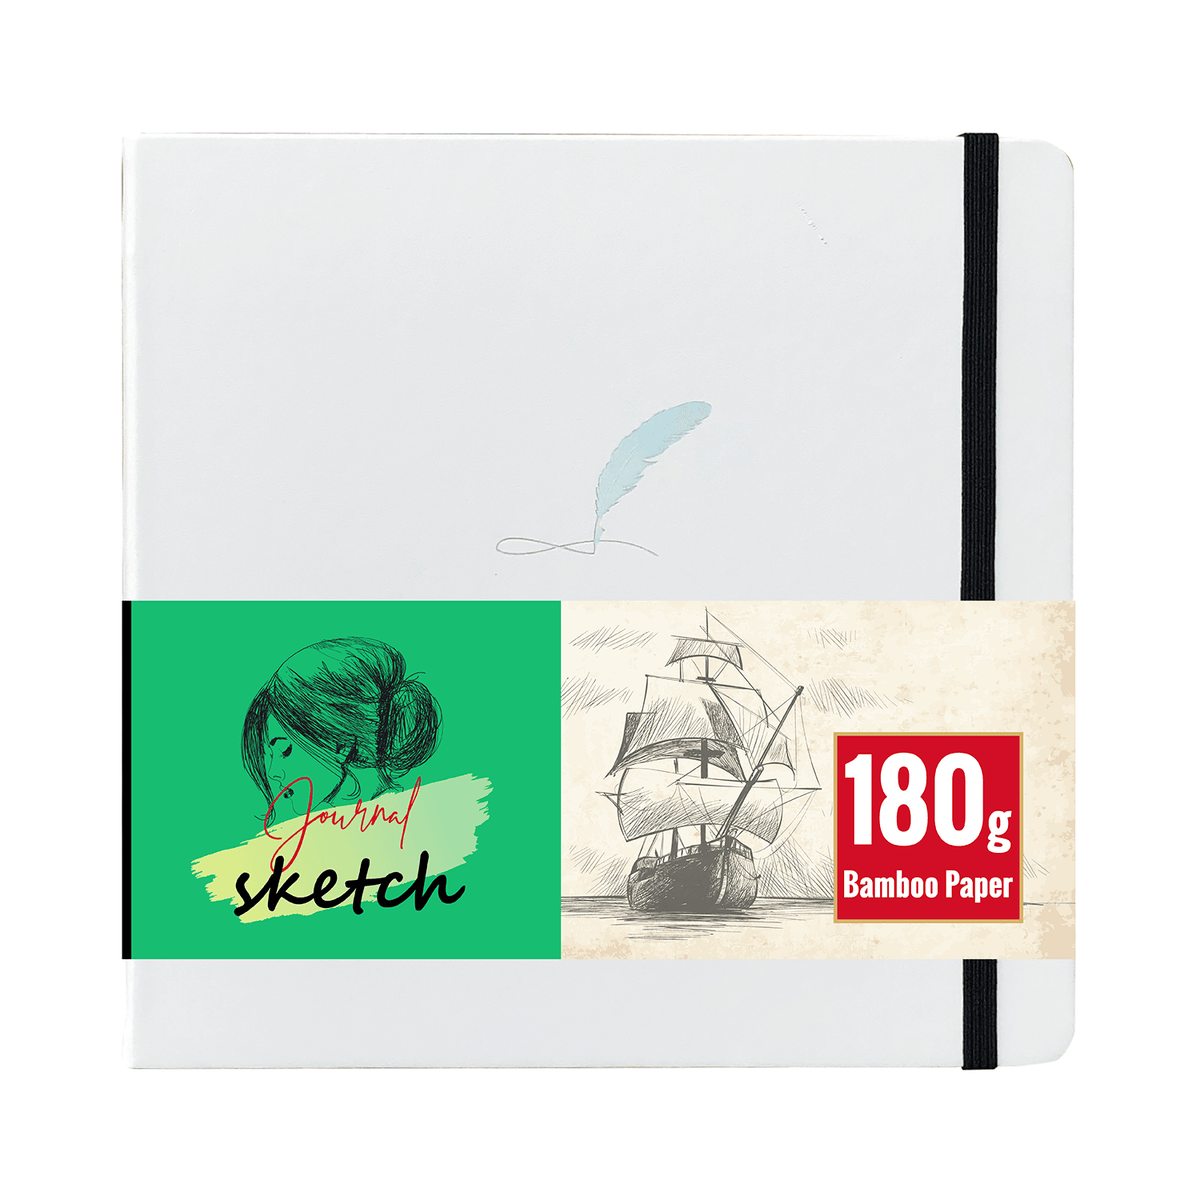 8X8 Square Hardcover SKetchbook Journal 180GSM Bamboo PAPER 128 Pages - Doe - bukenotebook